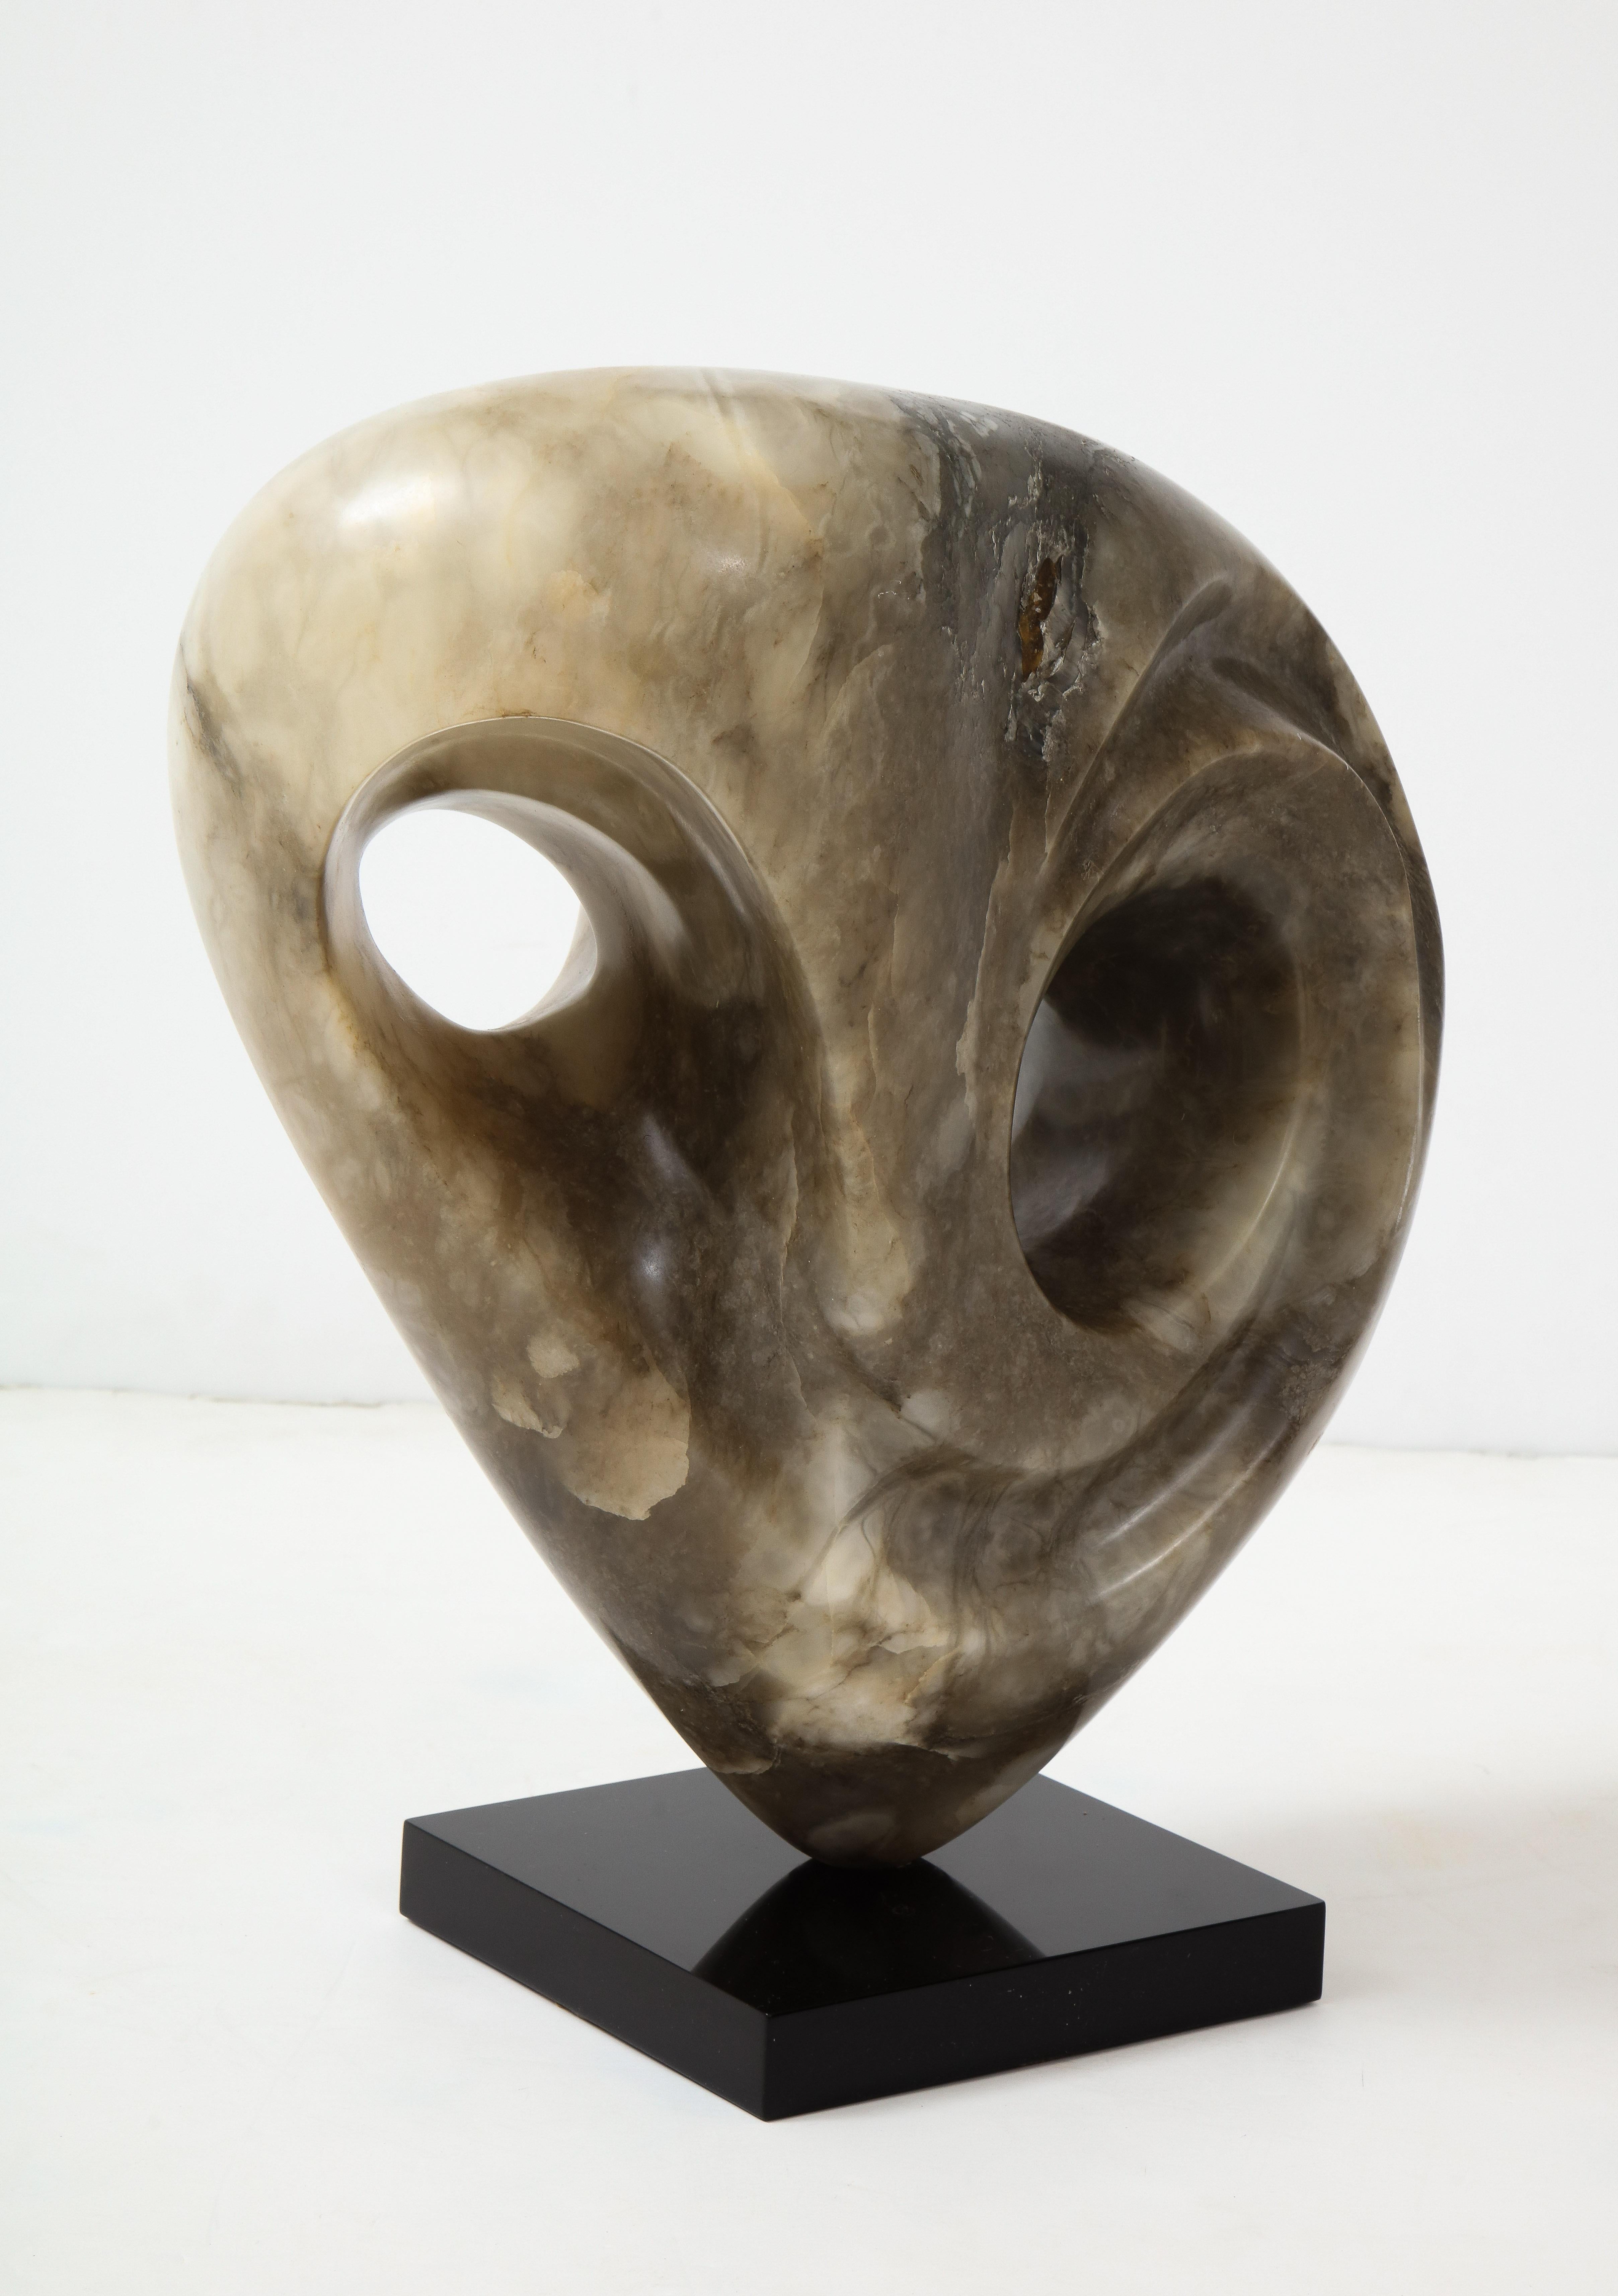 1970's Mid-Century Modern Signed Carved Stone Abstract Owl Sculpture im Zustand „Gut“ im Angebot in New York, NY